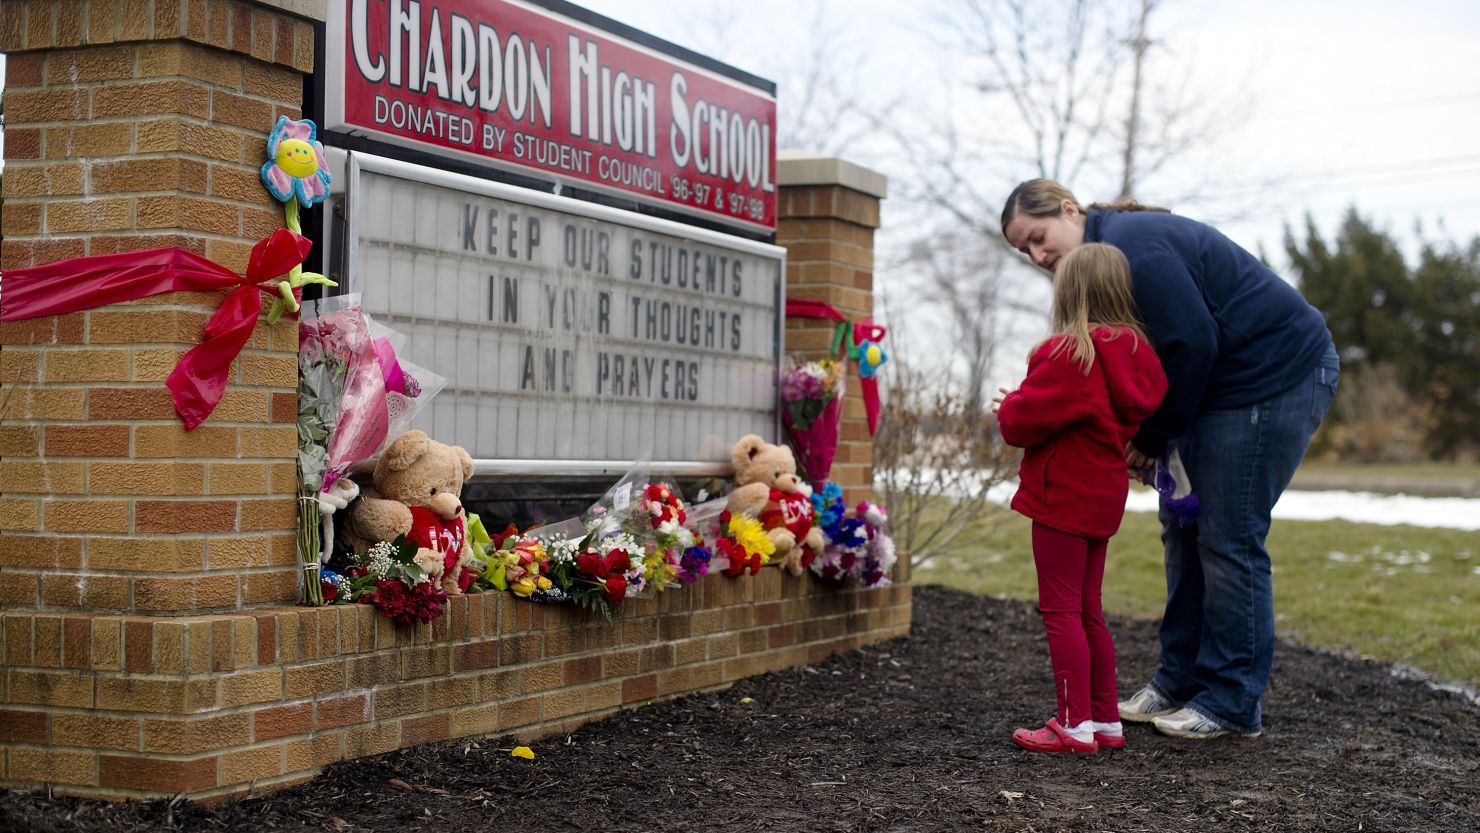 Angela May and her daughter, Eleanore, 5, of Chardon place flowers on the sign outside Chardon High School.